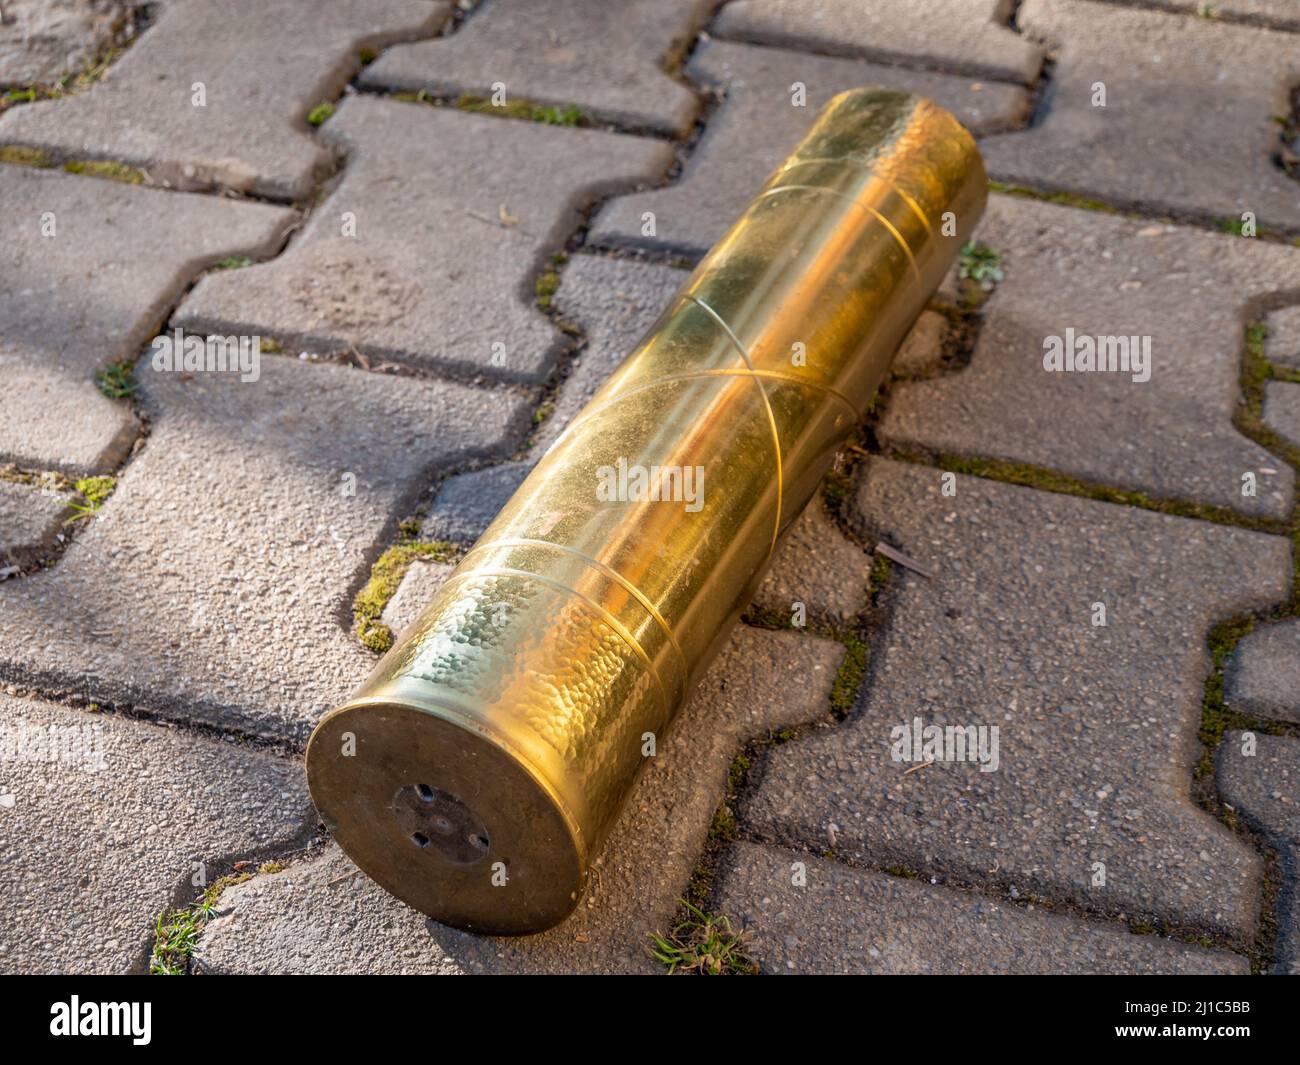 Shell casing from the war Stock Photo